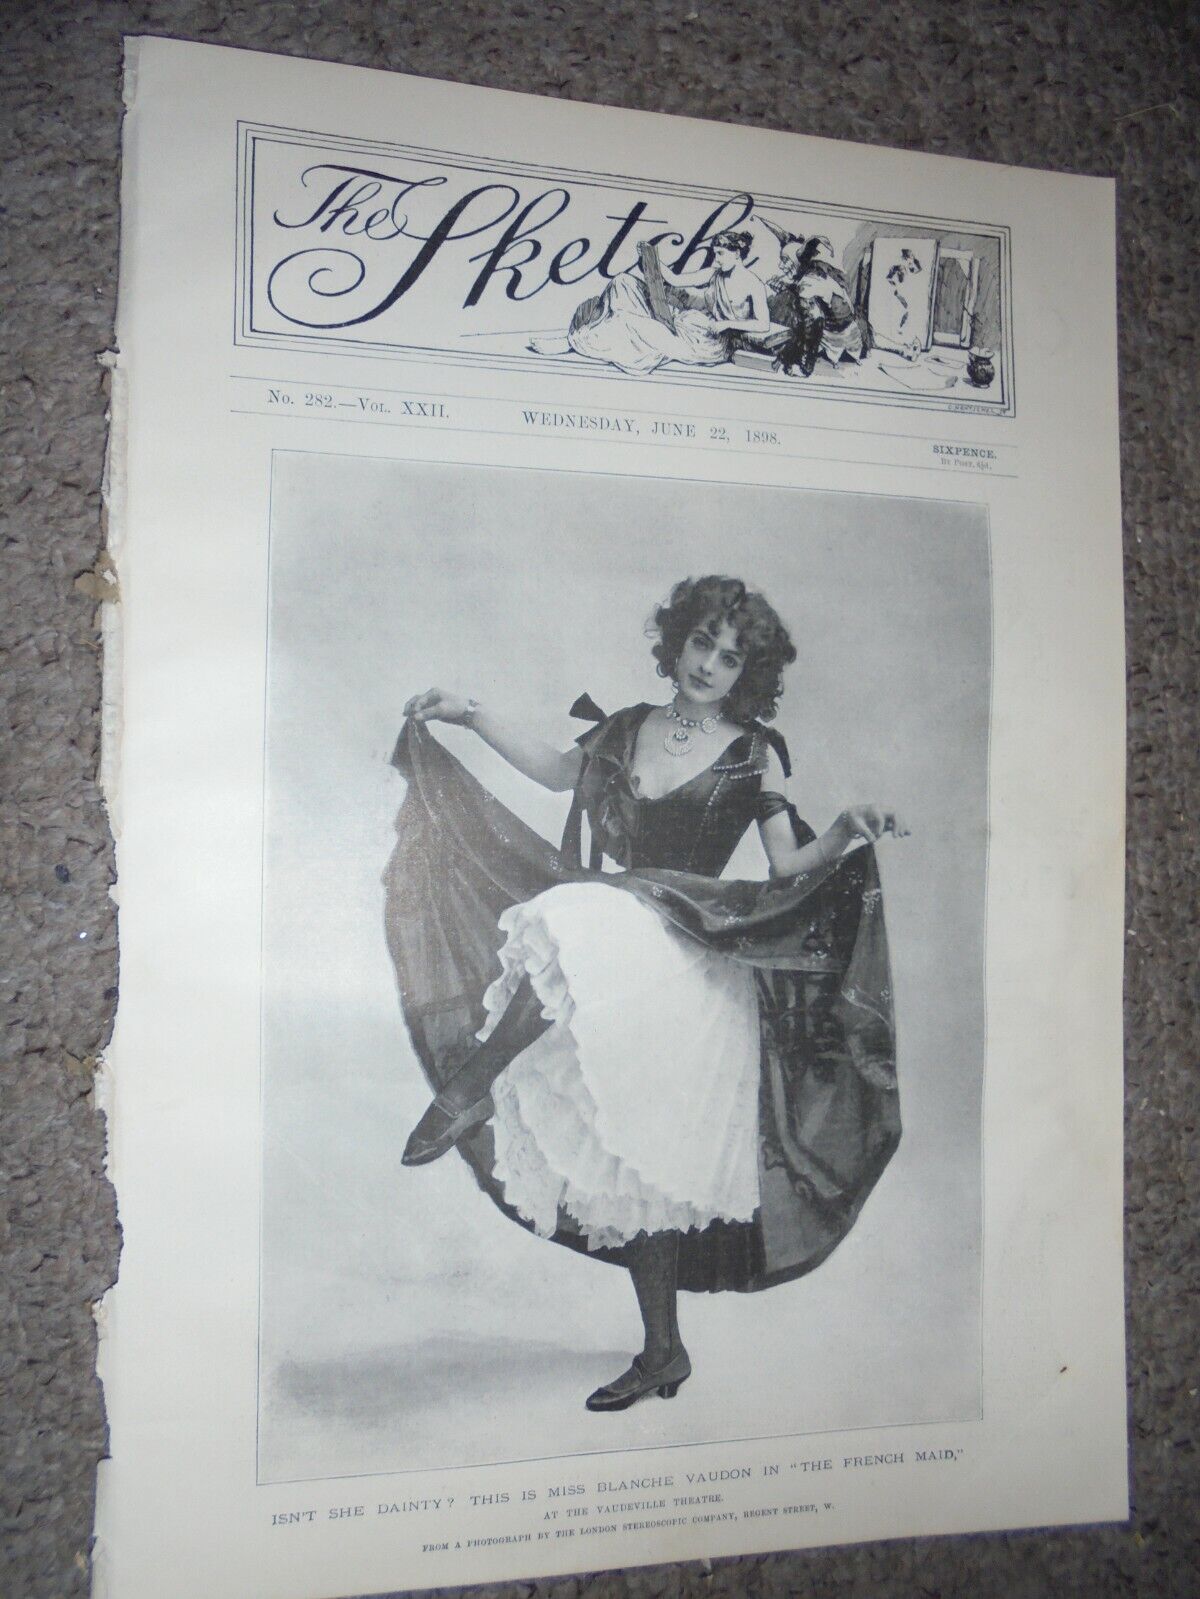 Printed photo actress Blanche Vaudon The French Maid Vaudeville Theatre 1898